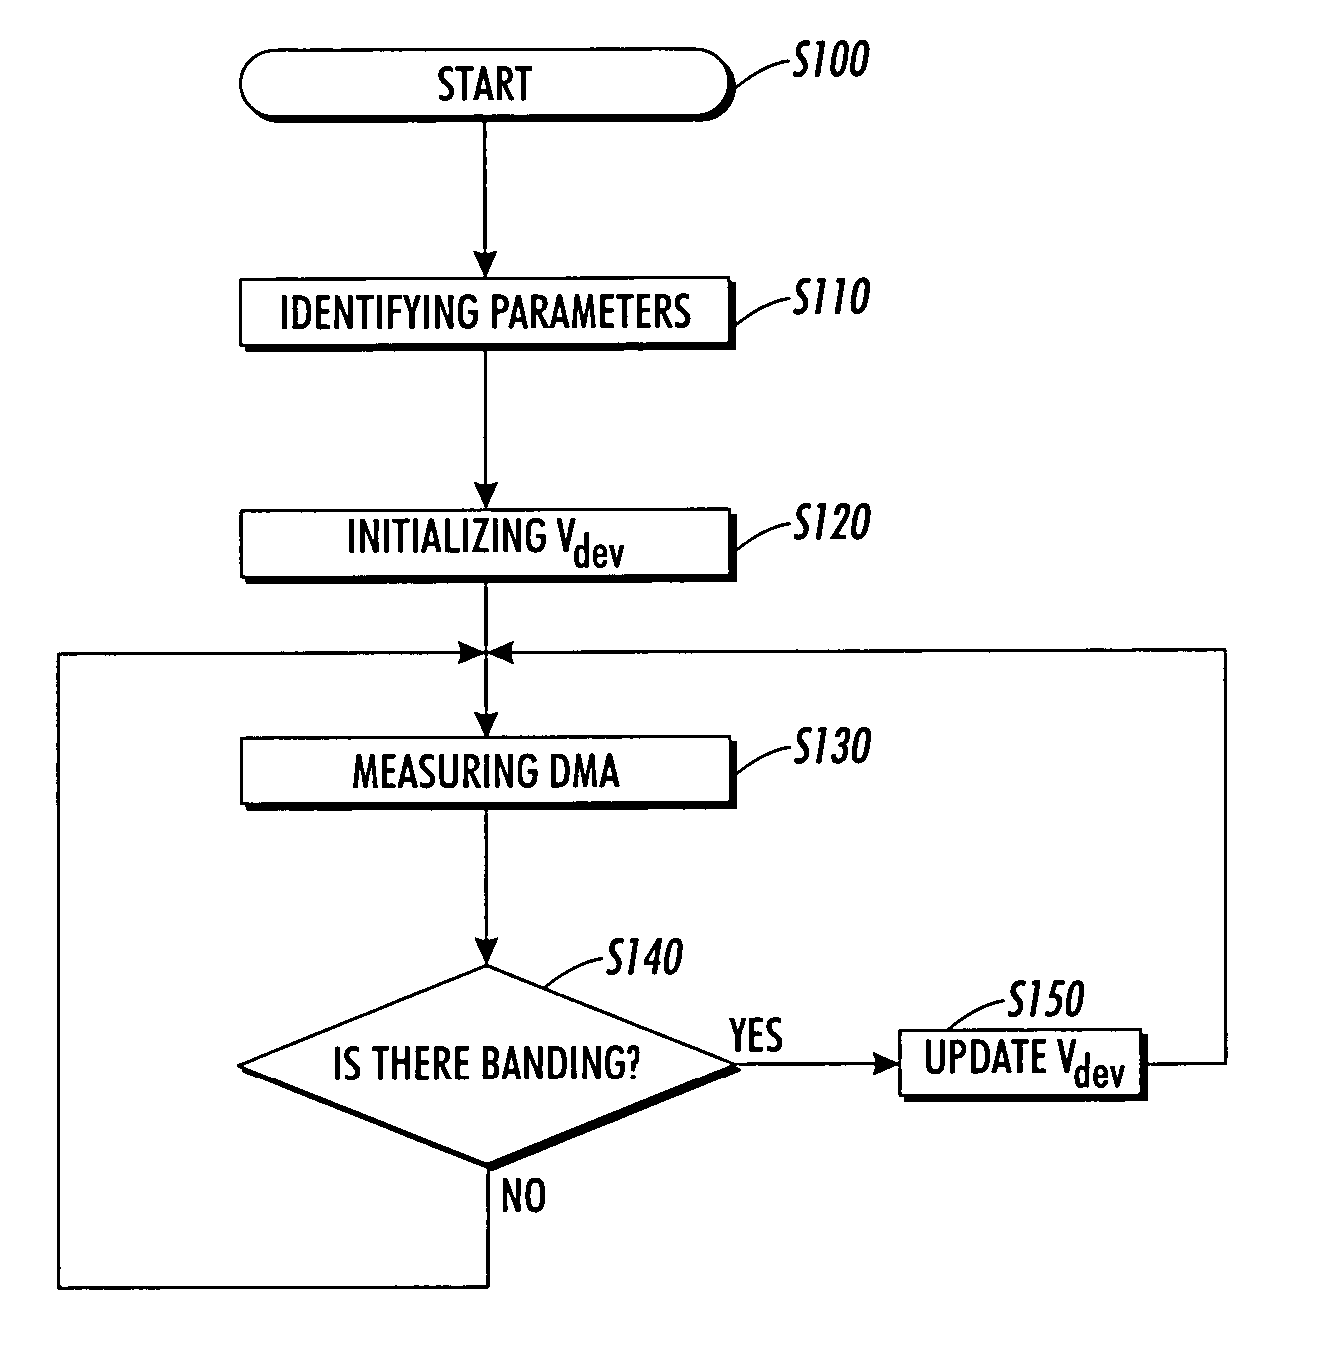 Systems and methods for correcting banding defects using feedback and/or feedforward control